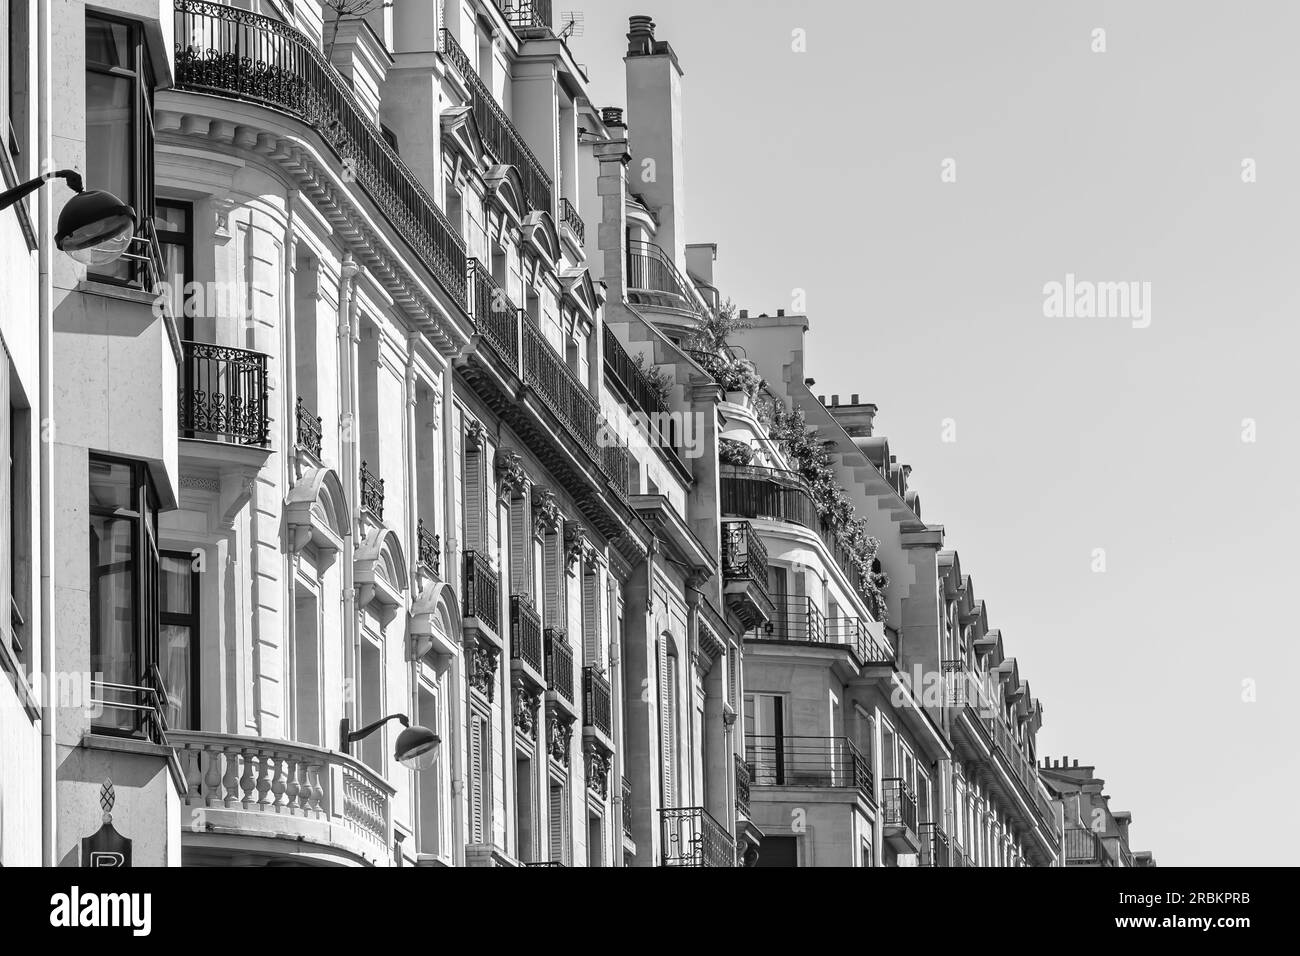 View of typical parisian buildings in the center of Paris France in black and white Stock Photo